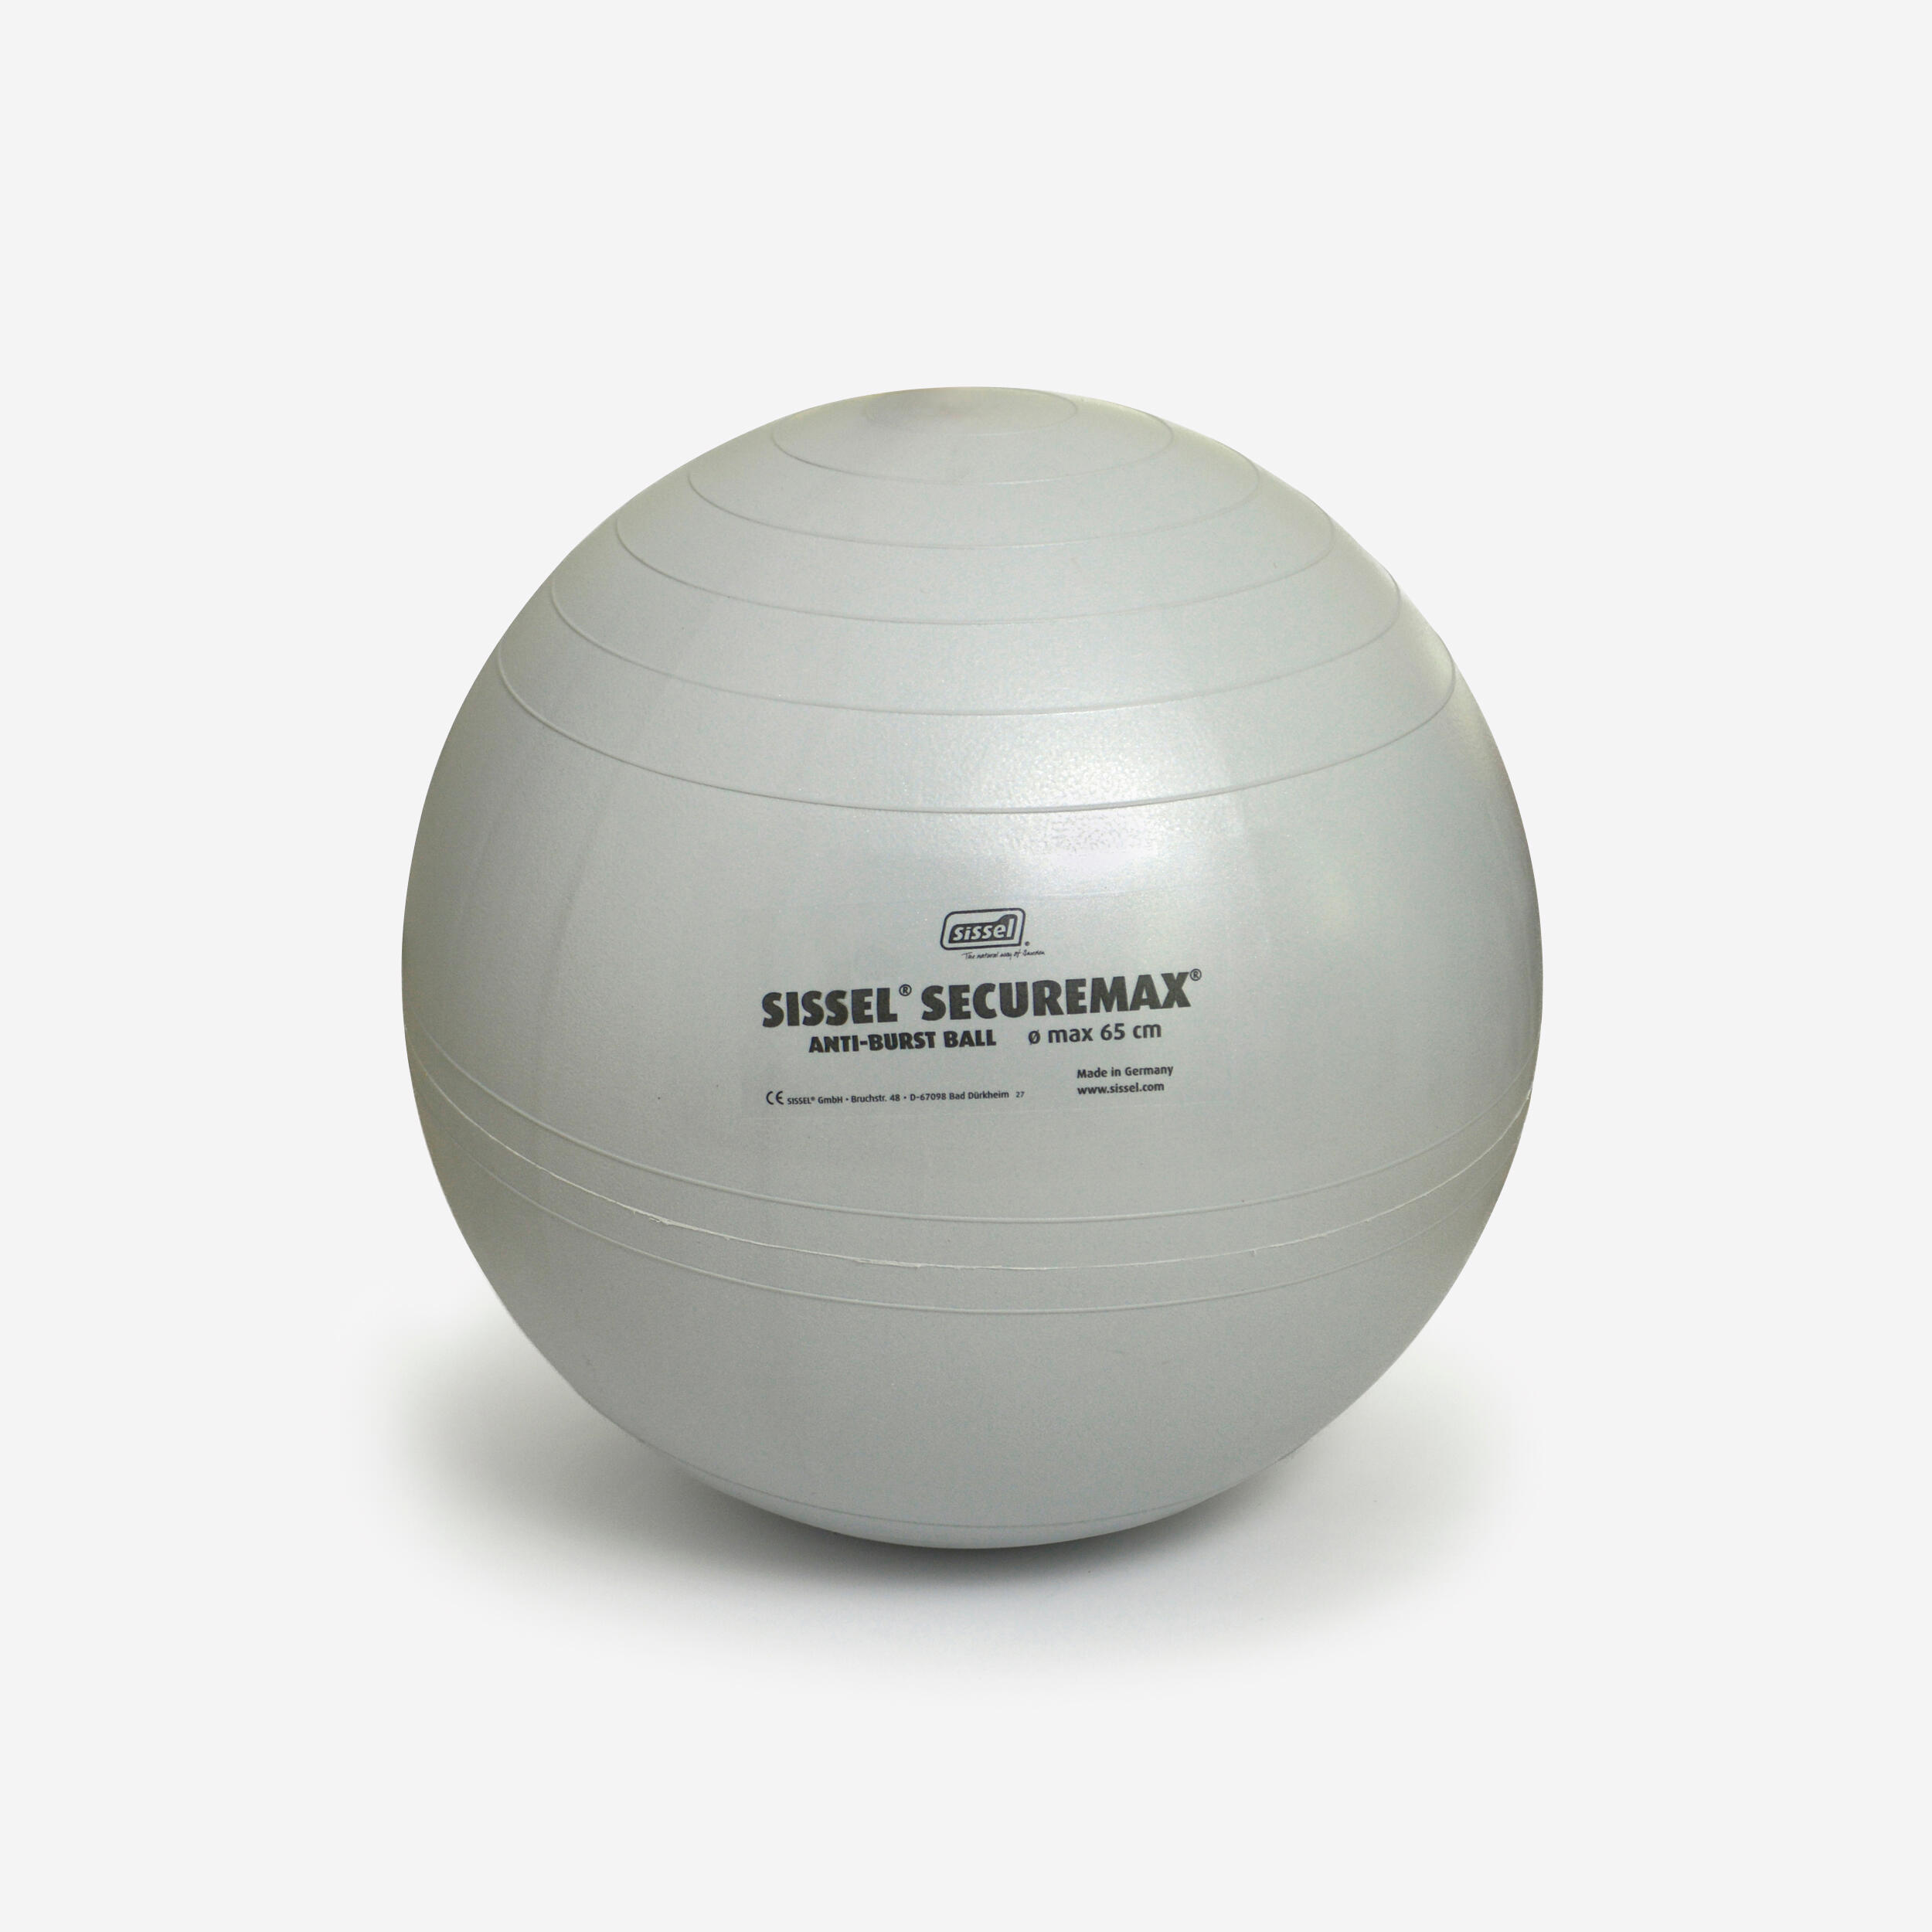 Gym Ball Secure Max Fitness Size 2 65 cm - Grey 1/2